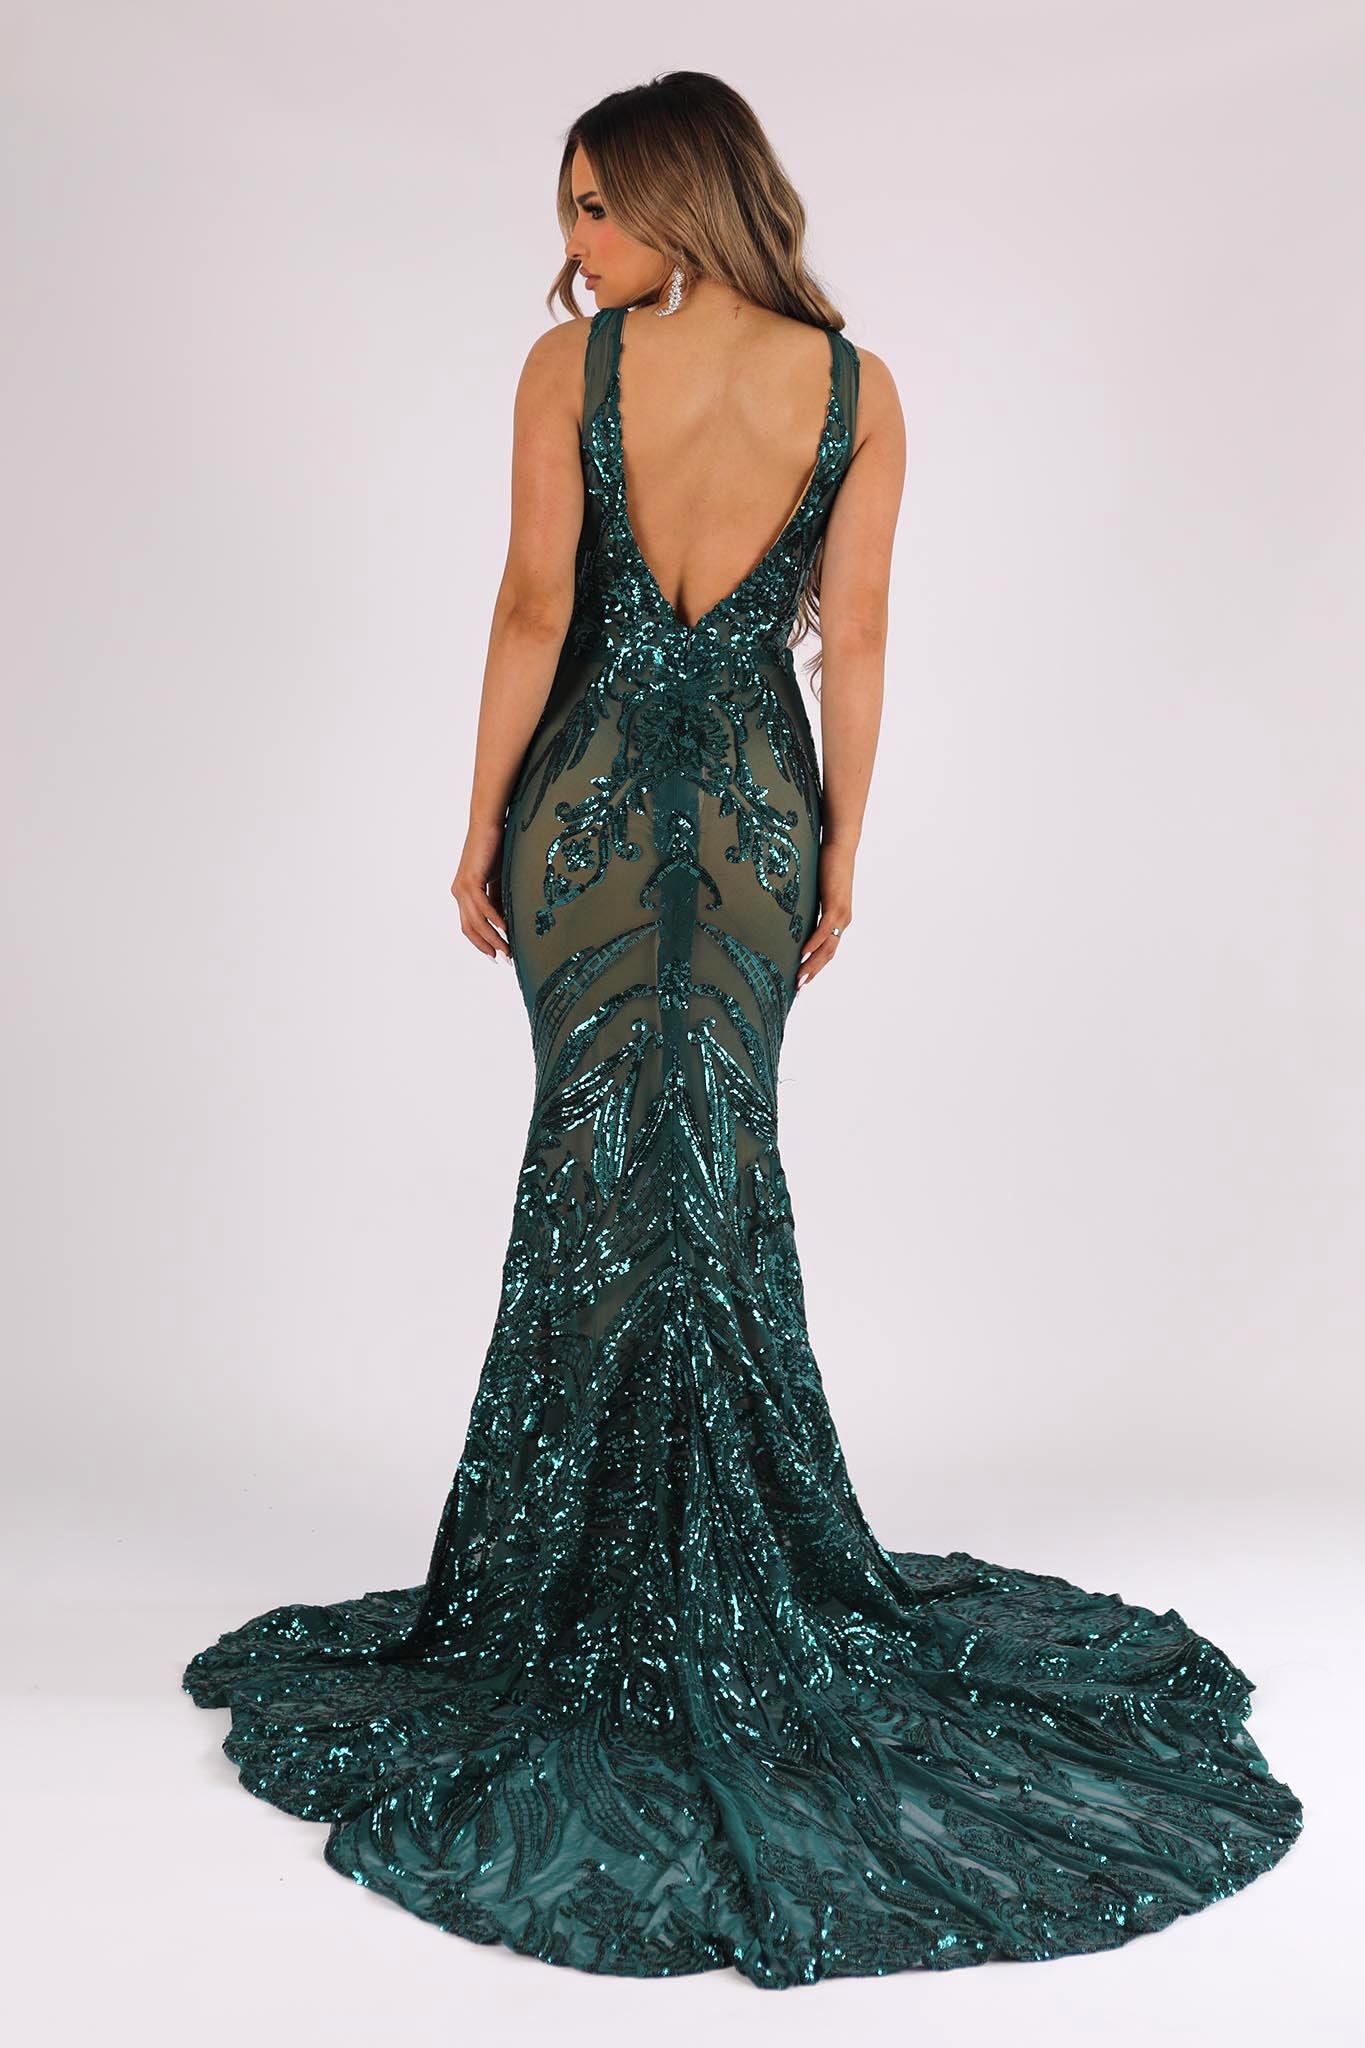 Adeline - Emerald/Nude | Nbluxe Bridal & Prom Dresses US Store – NBLUXE